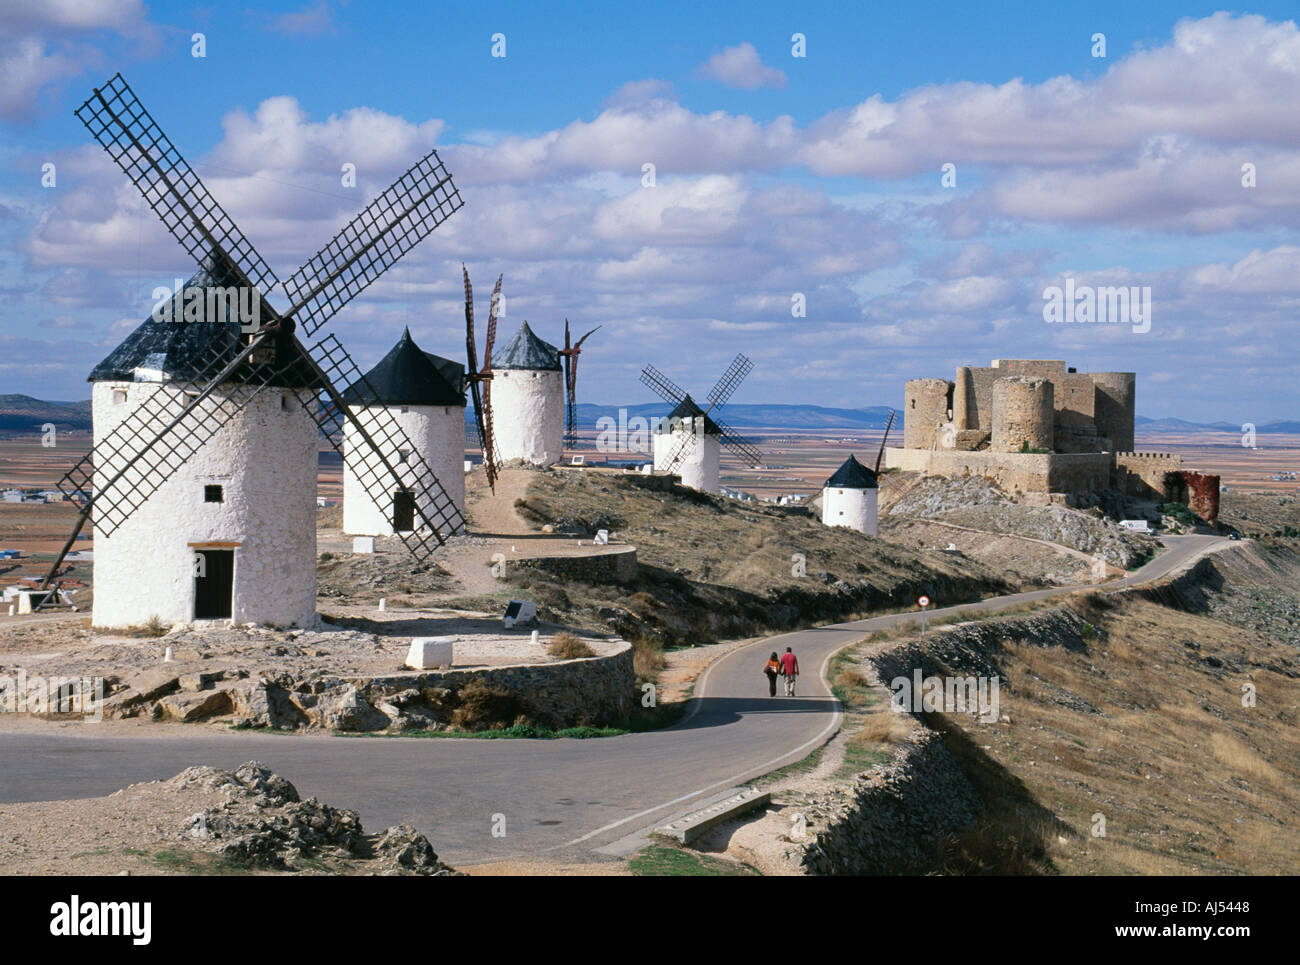 Windmills and castle overlooking the plains of Castilla La Mancha Spain Couple walking together. Travel in Spain tourism culture Stock Photo